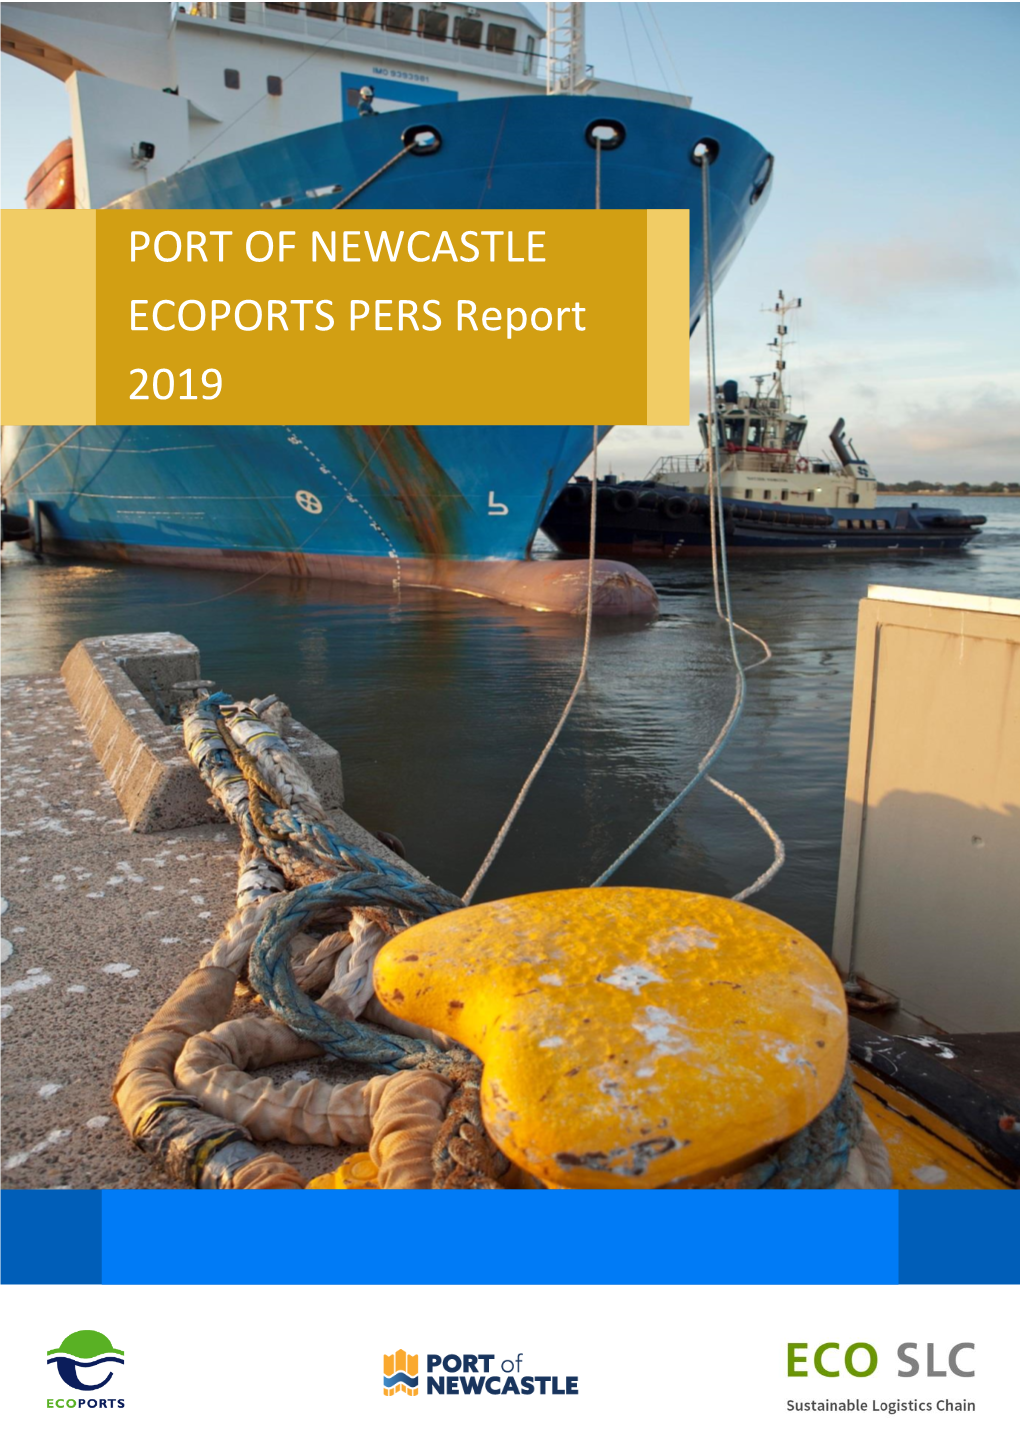 Download the Port of Newcastle ECOPORTS Pers Report 2019